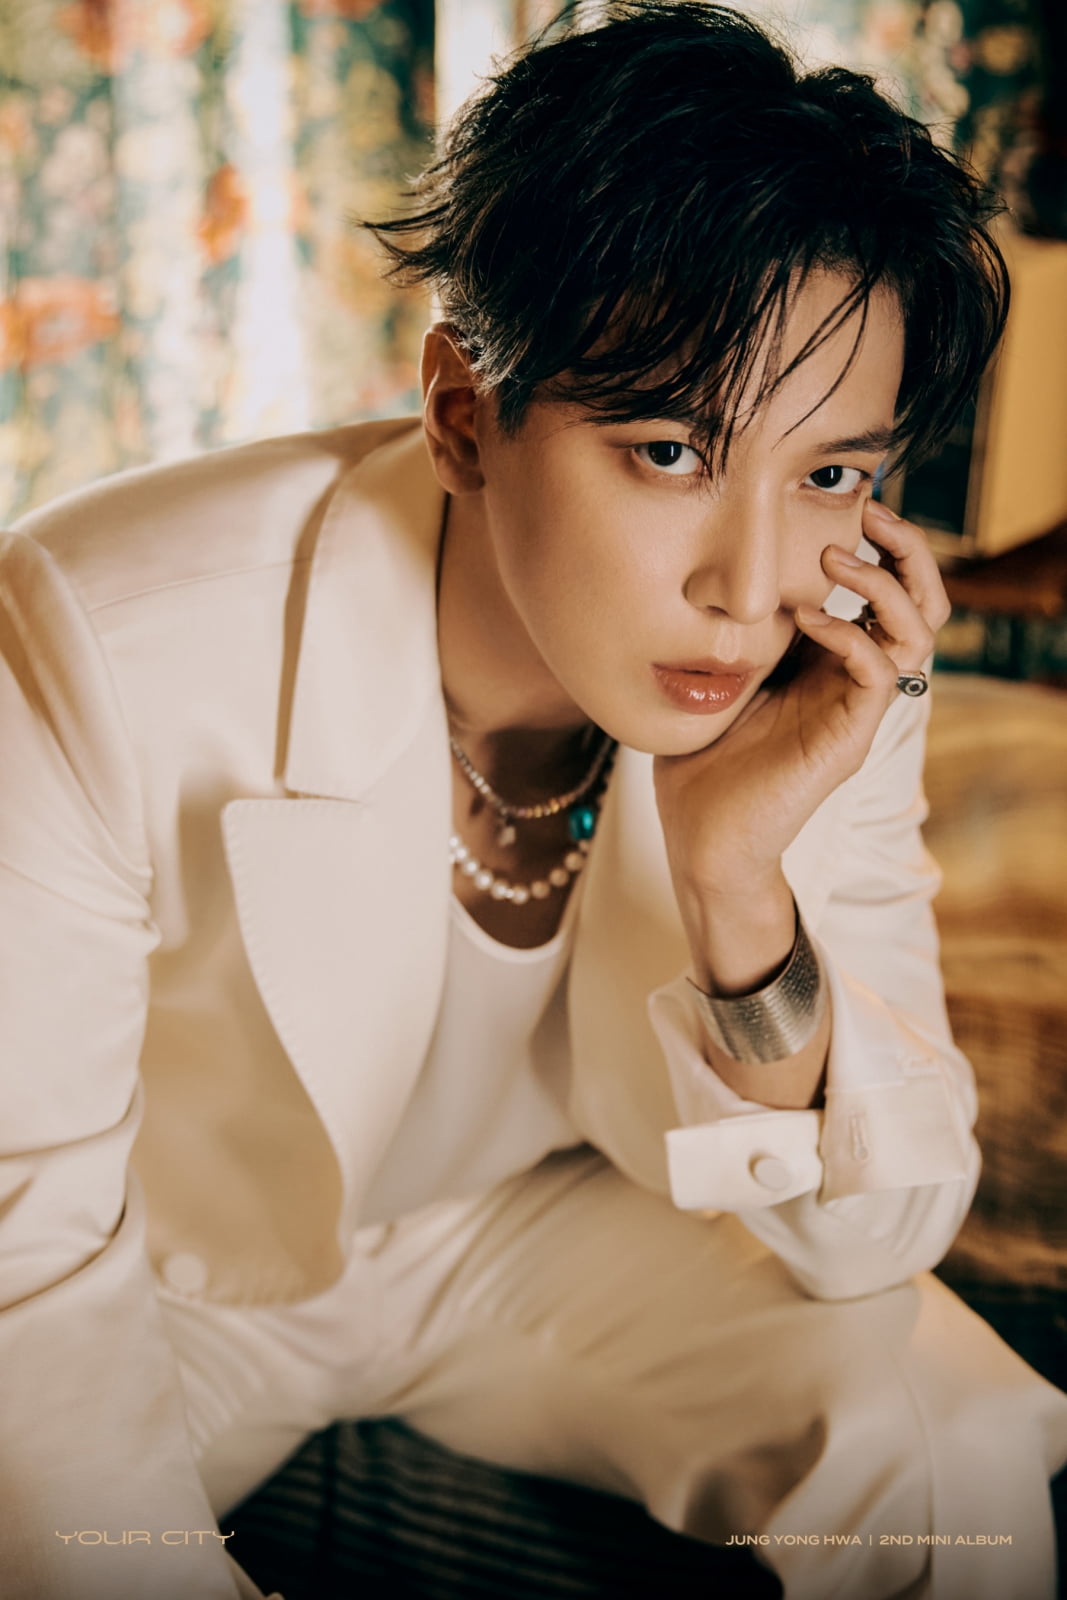 Singer Jung Yong-hwa, concept photo released